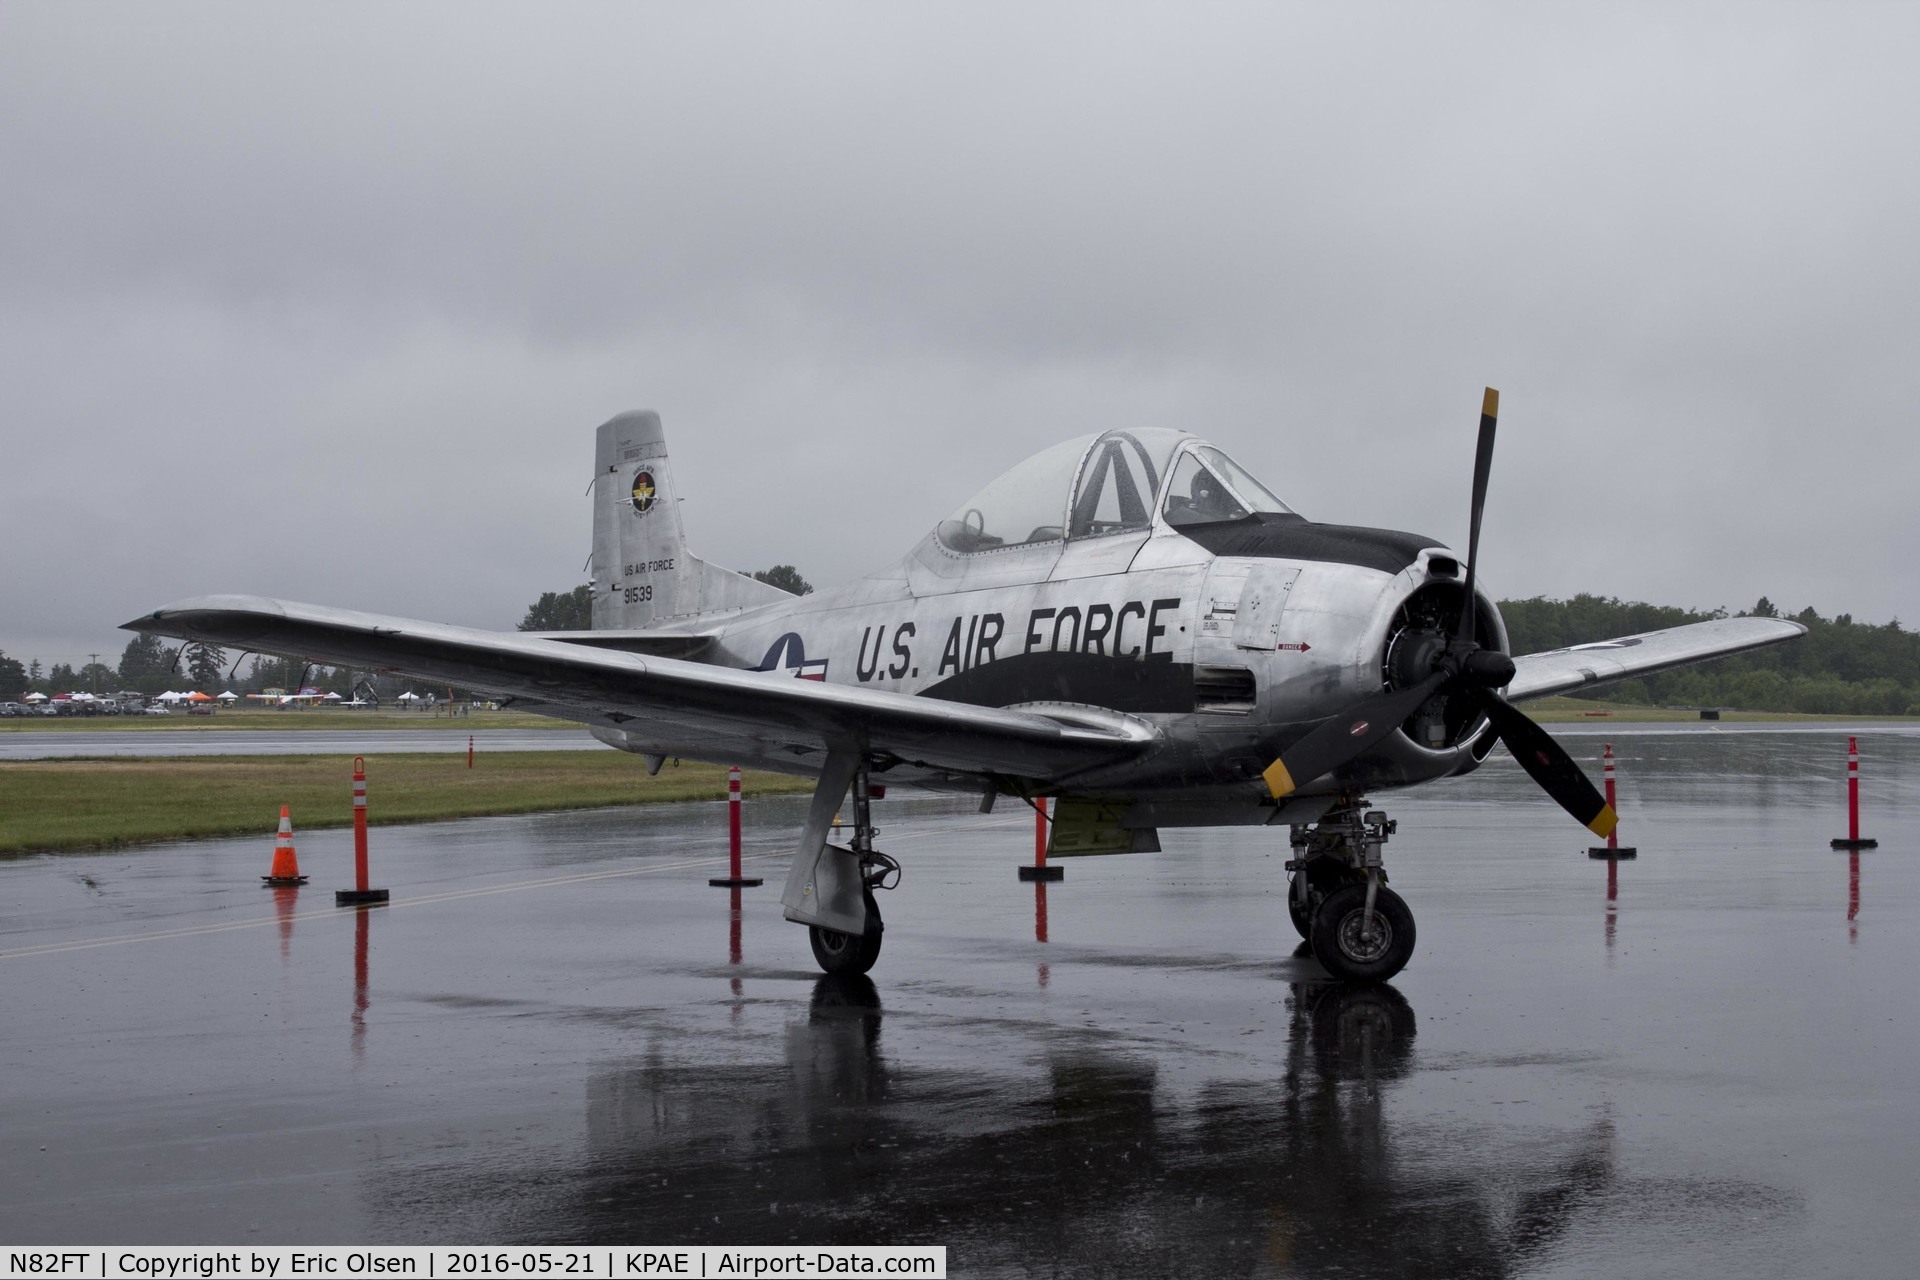 N82FT, 1949 North American T-28A Trojan C/N 159-51, 1949 T-28A Trojan at the 2016 Paine Field General Aviation Day.